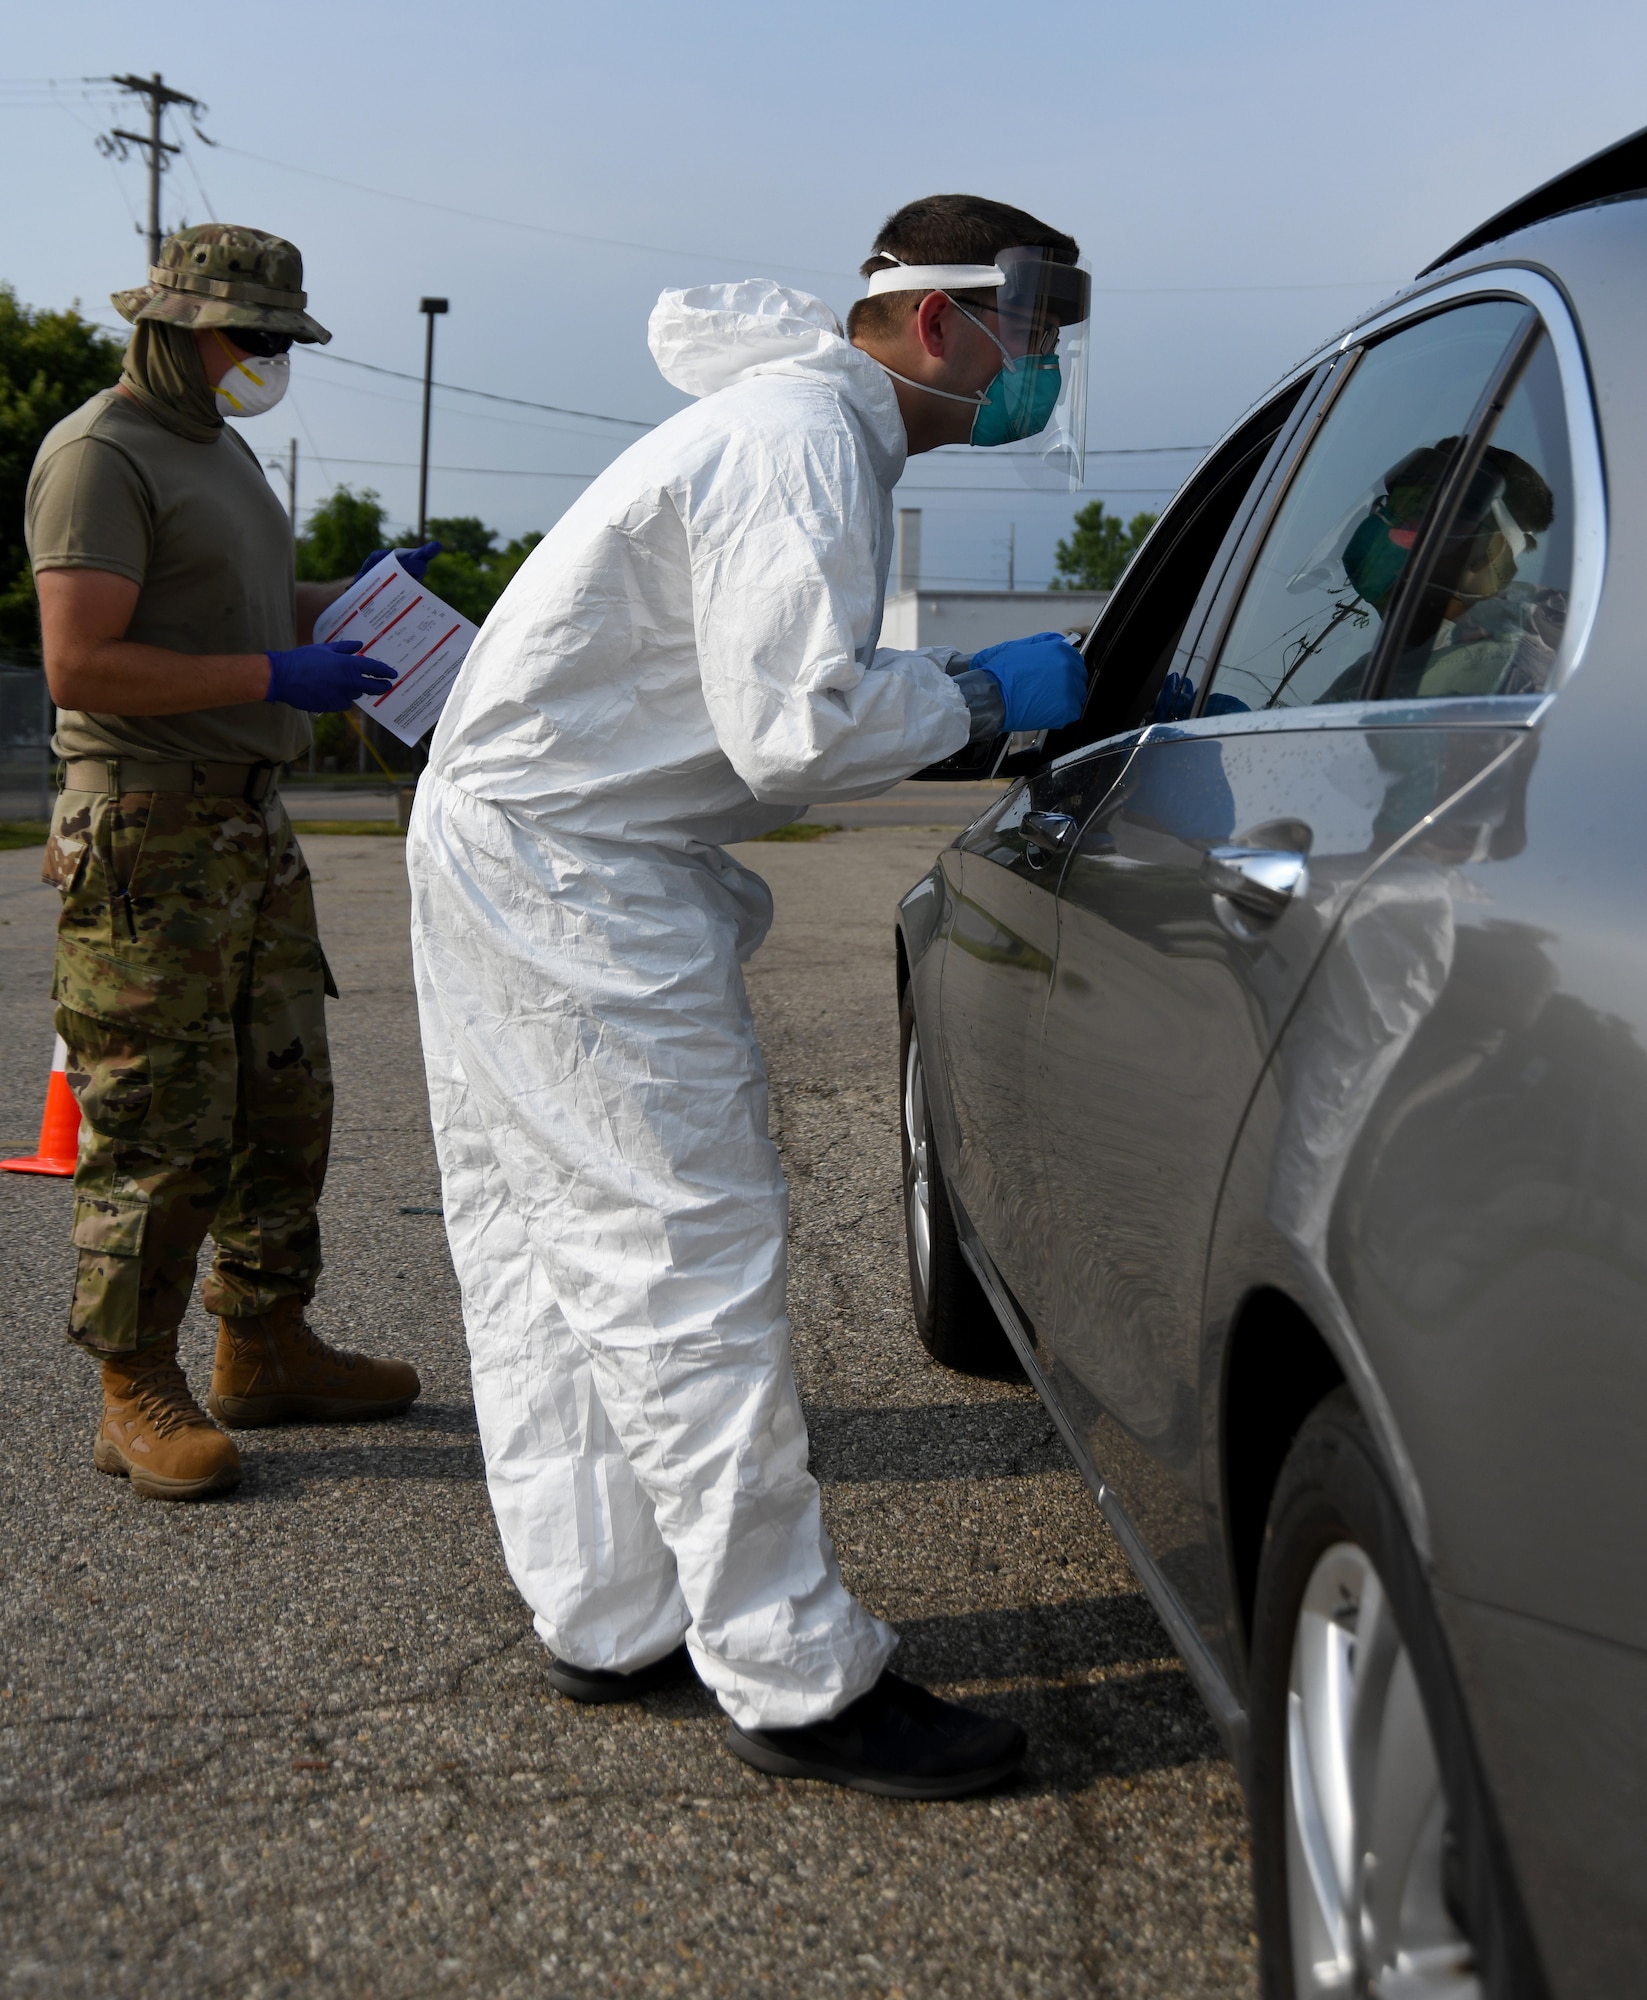 A member of the Michigan Air National Guard prepares to administer a COVID-19 test during drive-thru testing in Flint, Mich., July 10, 2020. The Michigan National Guard has partnered with a variety of state agencies to provide free tests to Michigan residents.